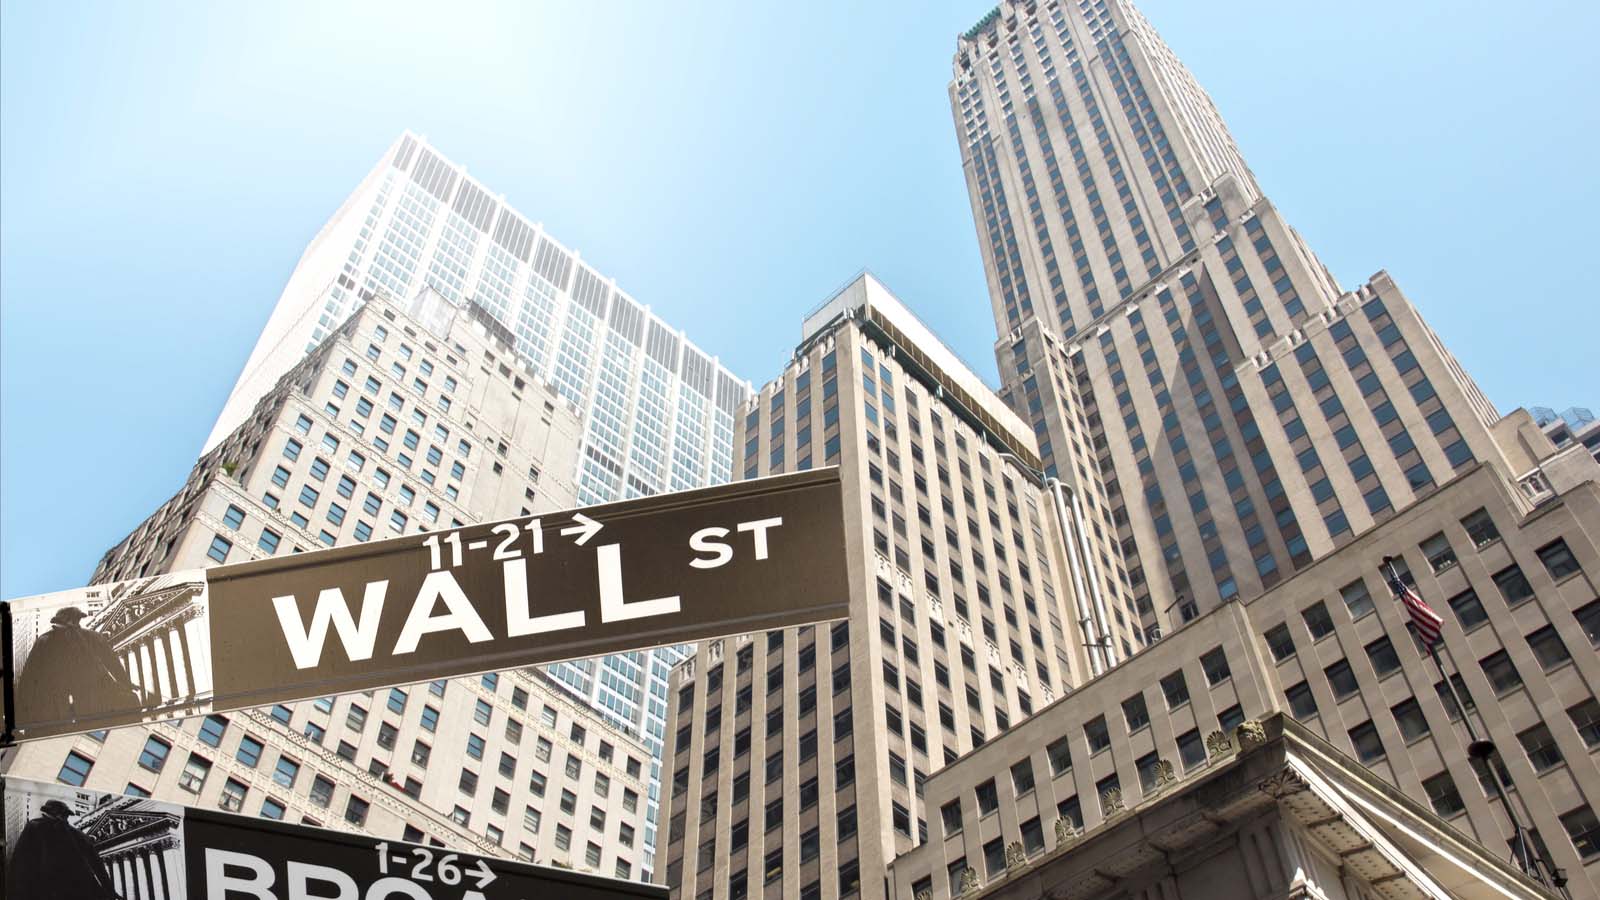 top stocks: skyscraper buildings viewed from the ground with Wall Street street sign in the foreground (10 richest people on Wall Street)